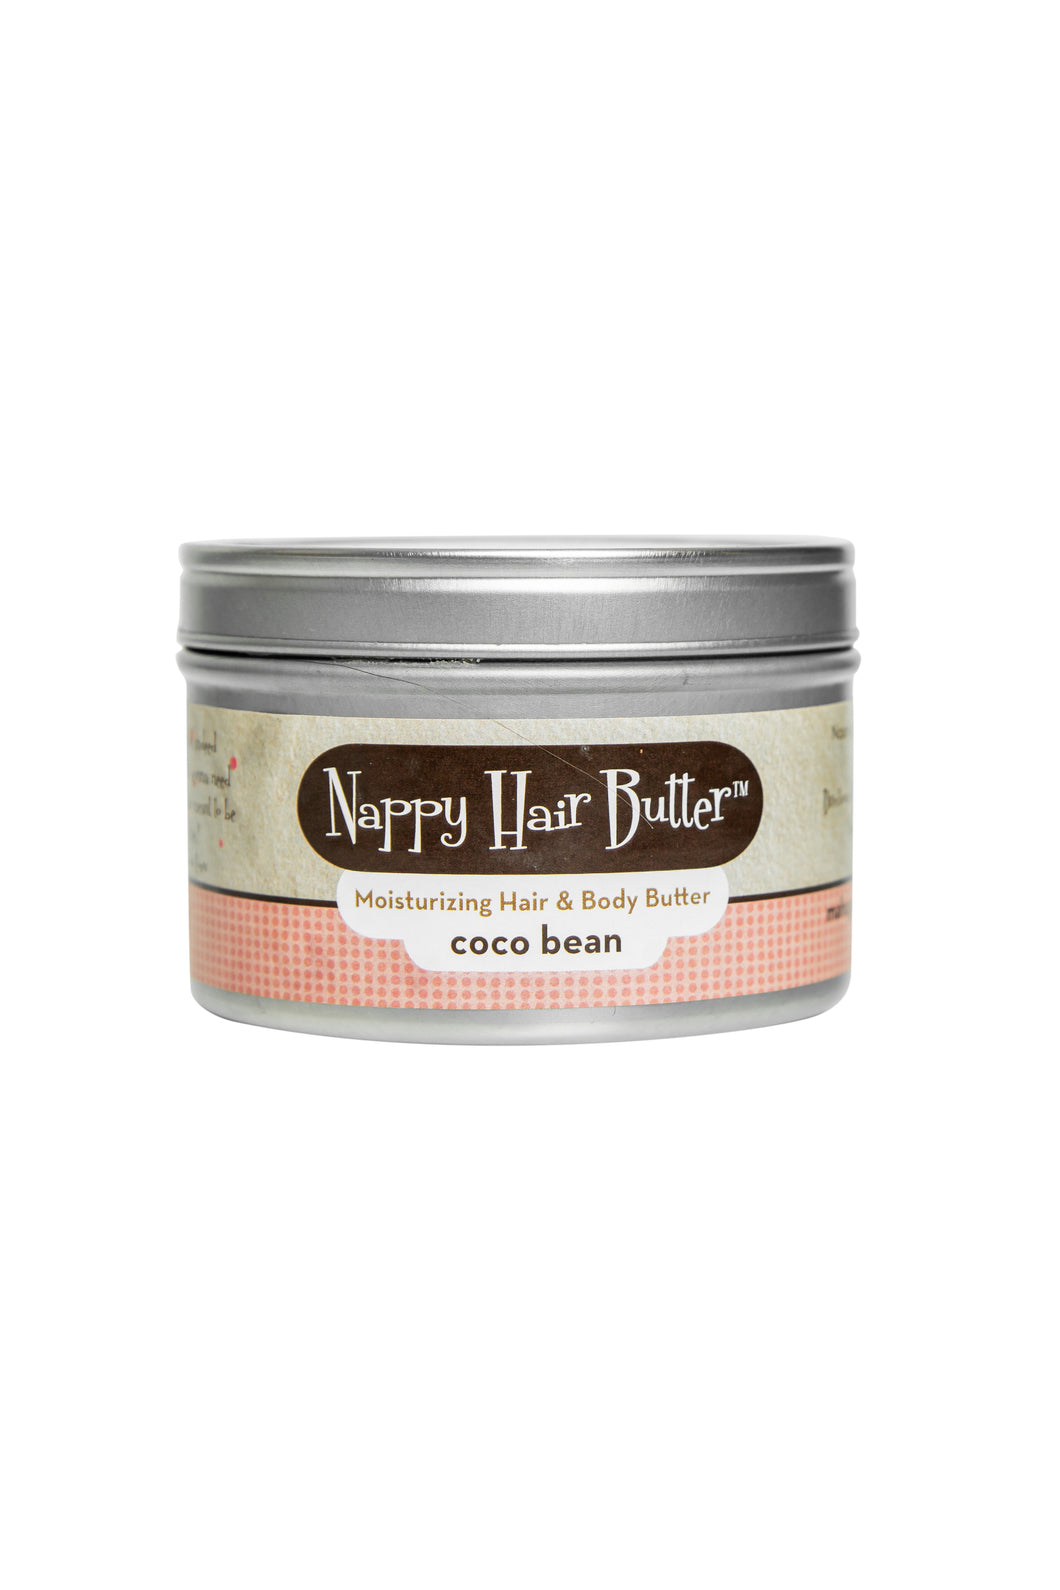 Nappy Butter Coco Bean 8 oz-Nappy Hair Butter-Mahogany Soul